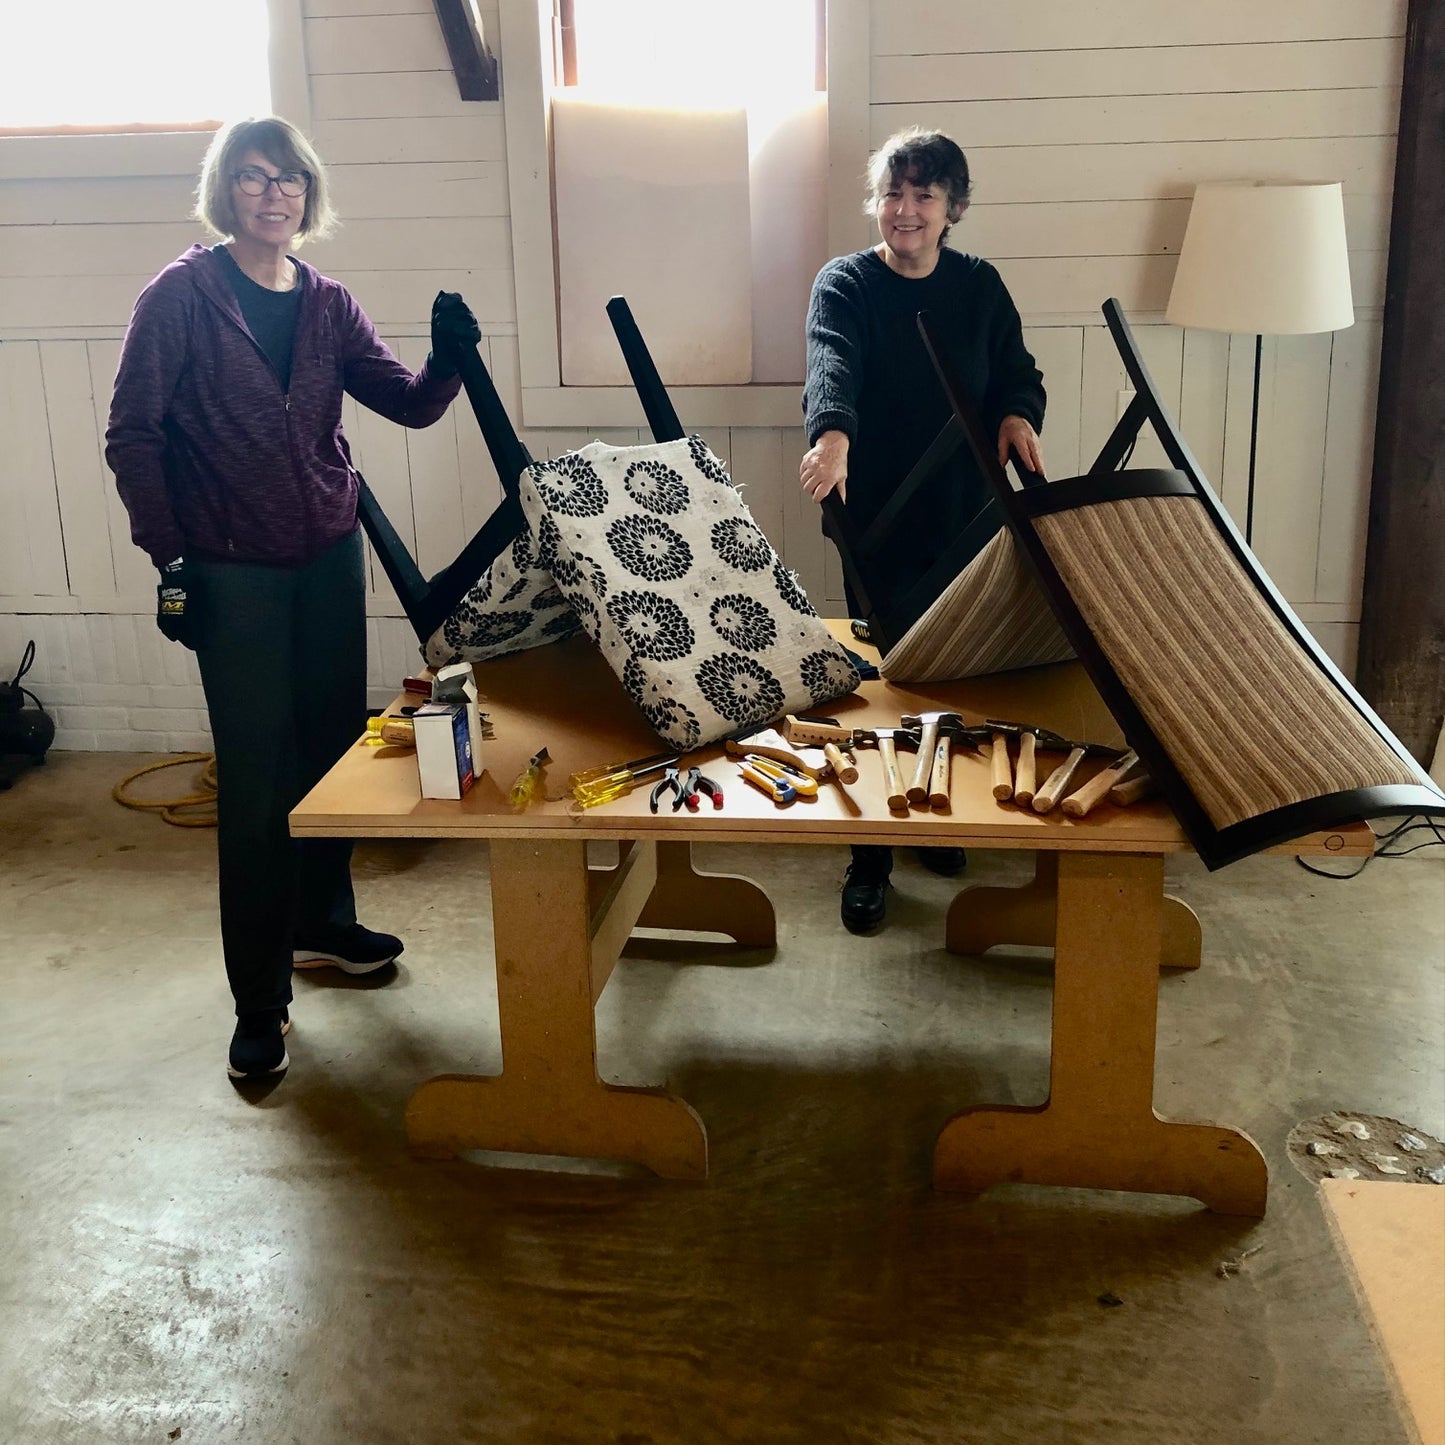 Bring Your Own Occasional Chair or Project, Upholstery Workshop, Friday Mornings, 10:00am-1:00pm, Beginning Friday May 3rd 2023